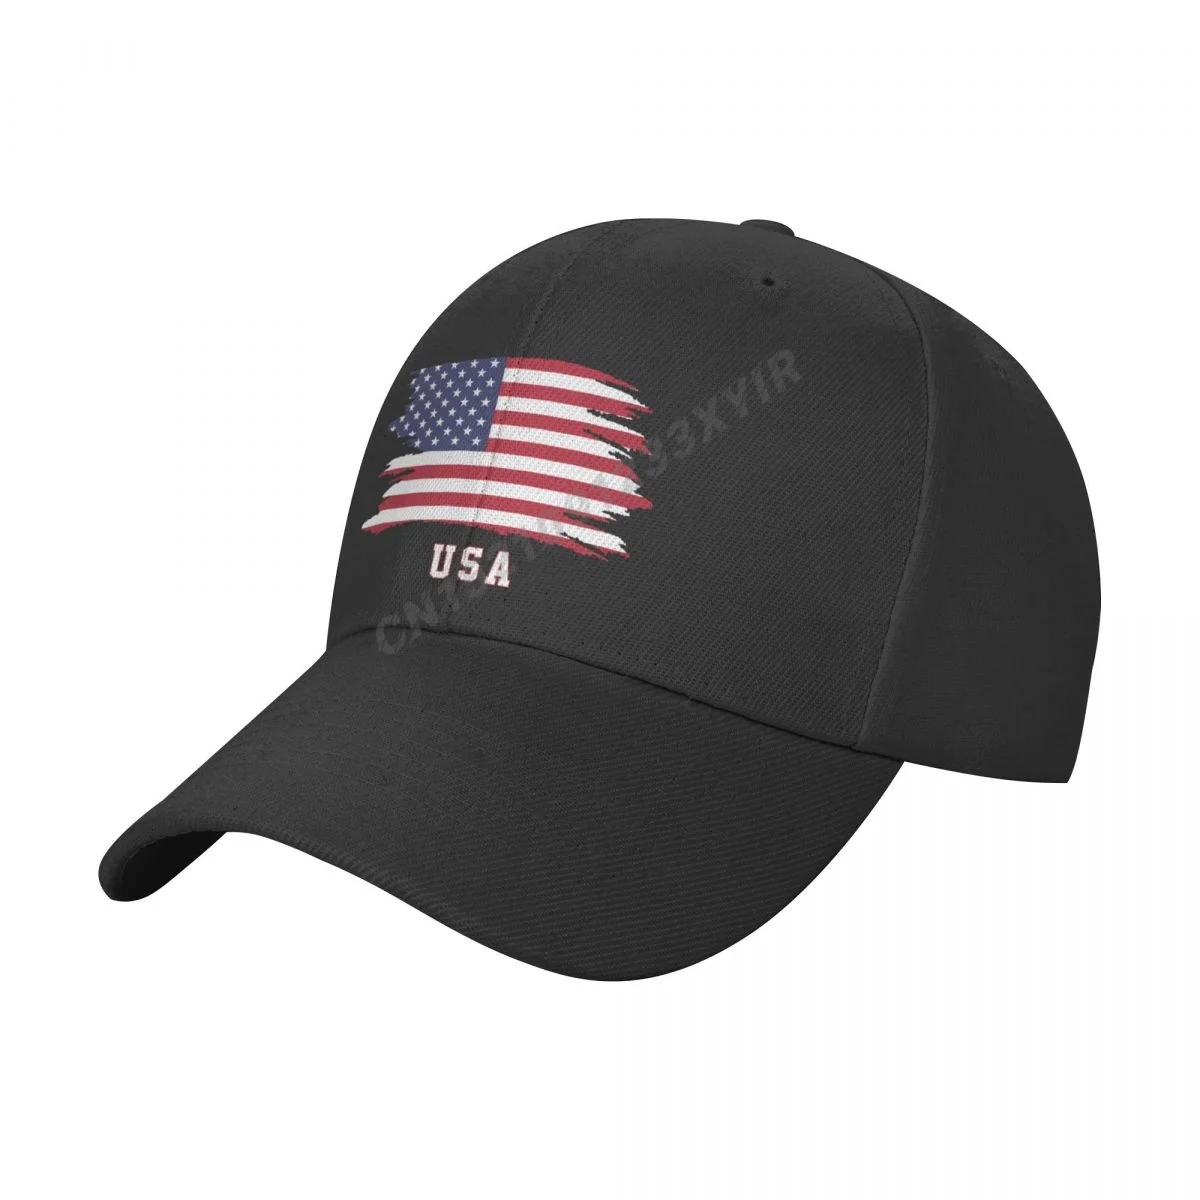 

Baseball Cap USA American Flag Cool United States Fans Wild Sun Shade Peaked Adjustable Outdoor Caps for Men Women